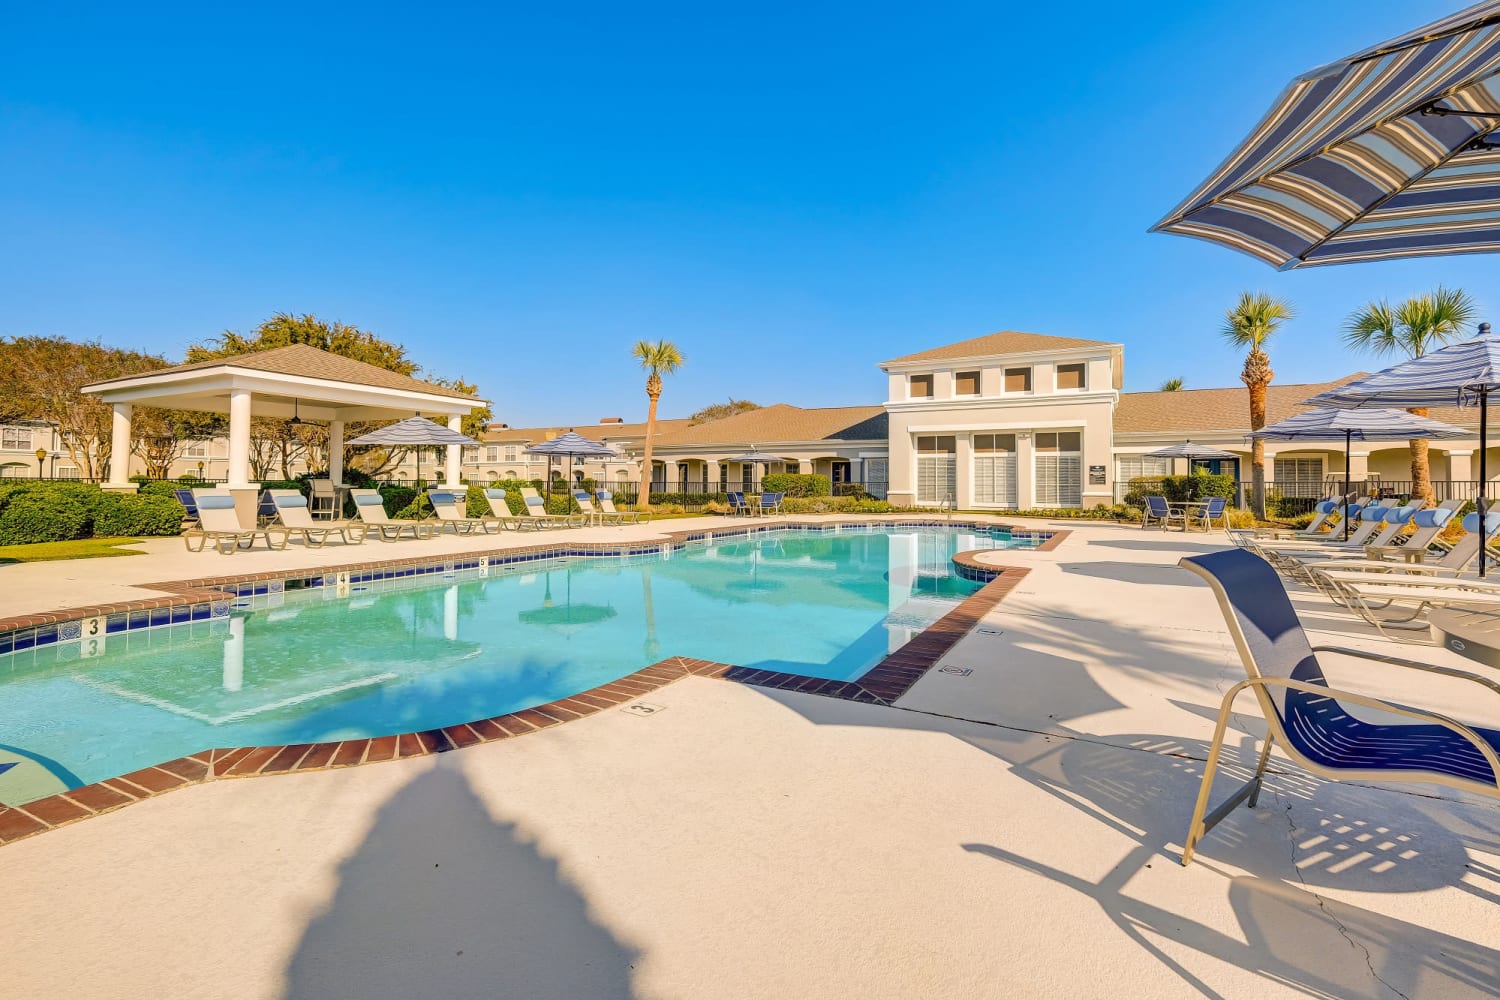 Pool and patio area at Chateau des Lions Apartment Homes in Lafayette, Louisiana